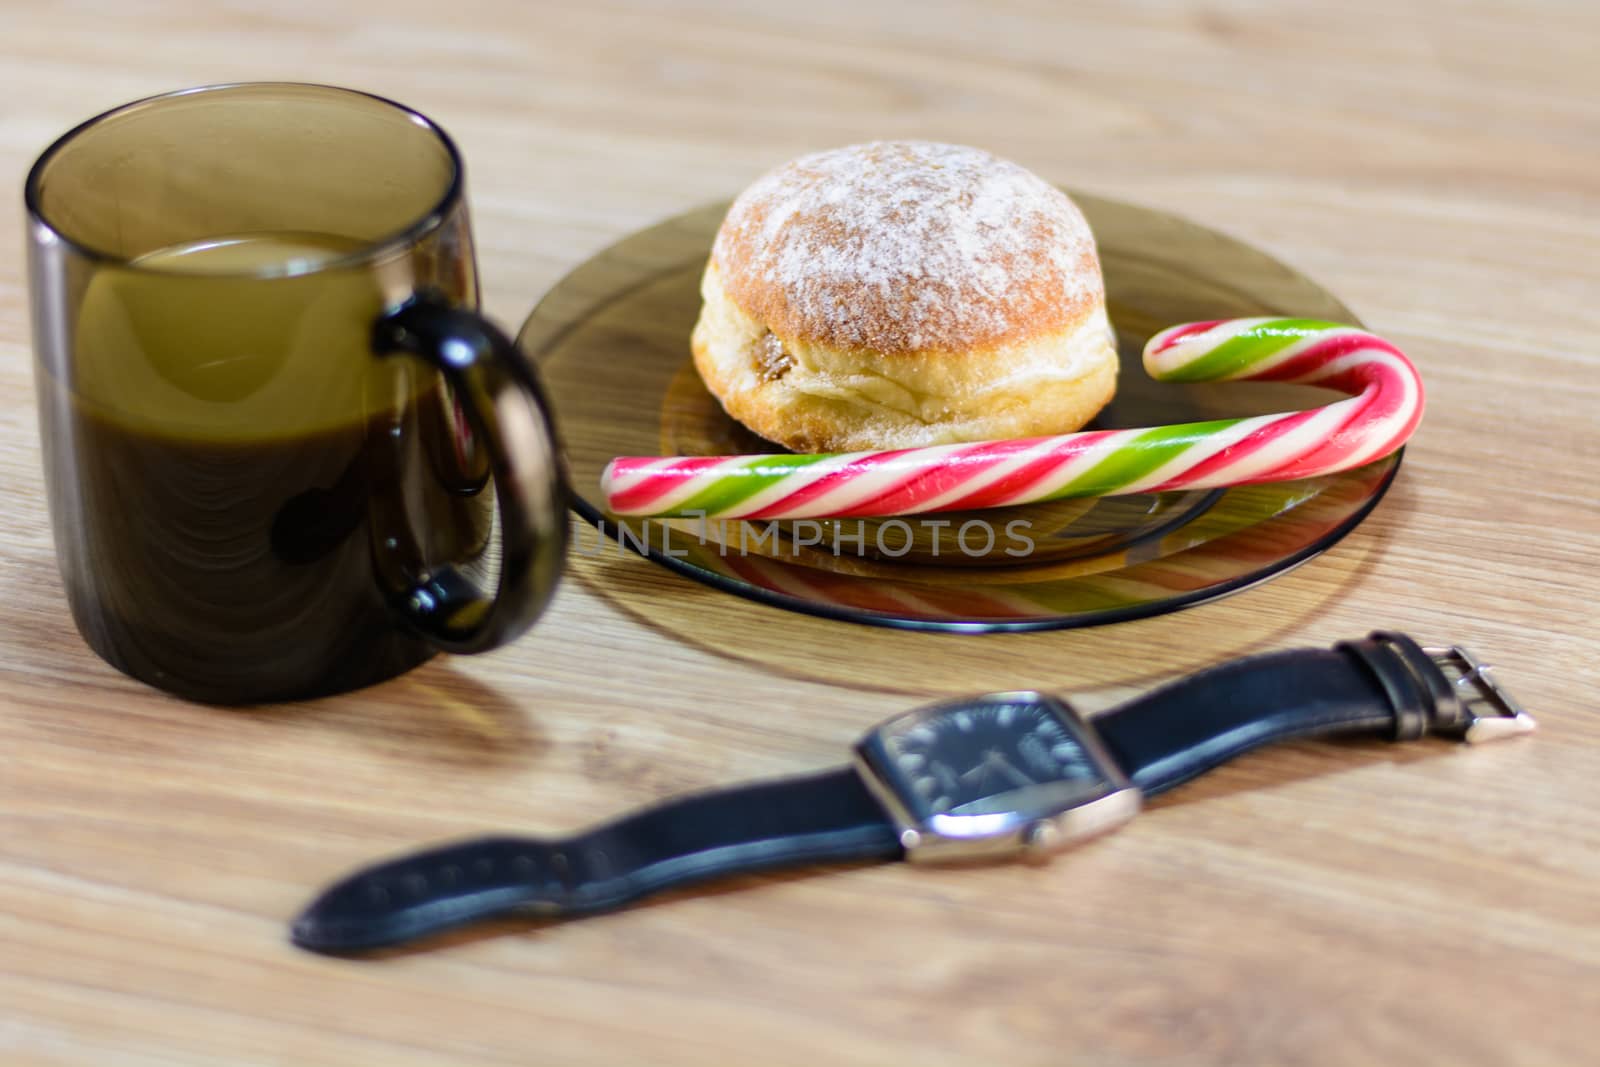 on the plate of a bun and candy along with coffee.